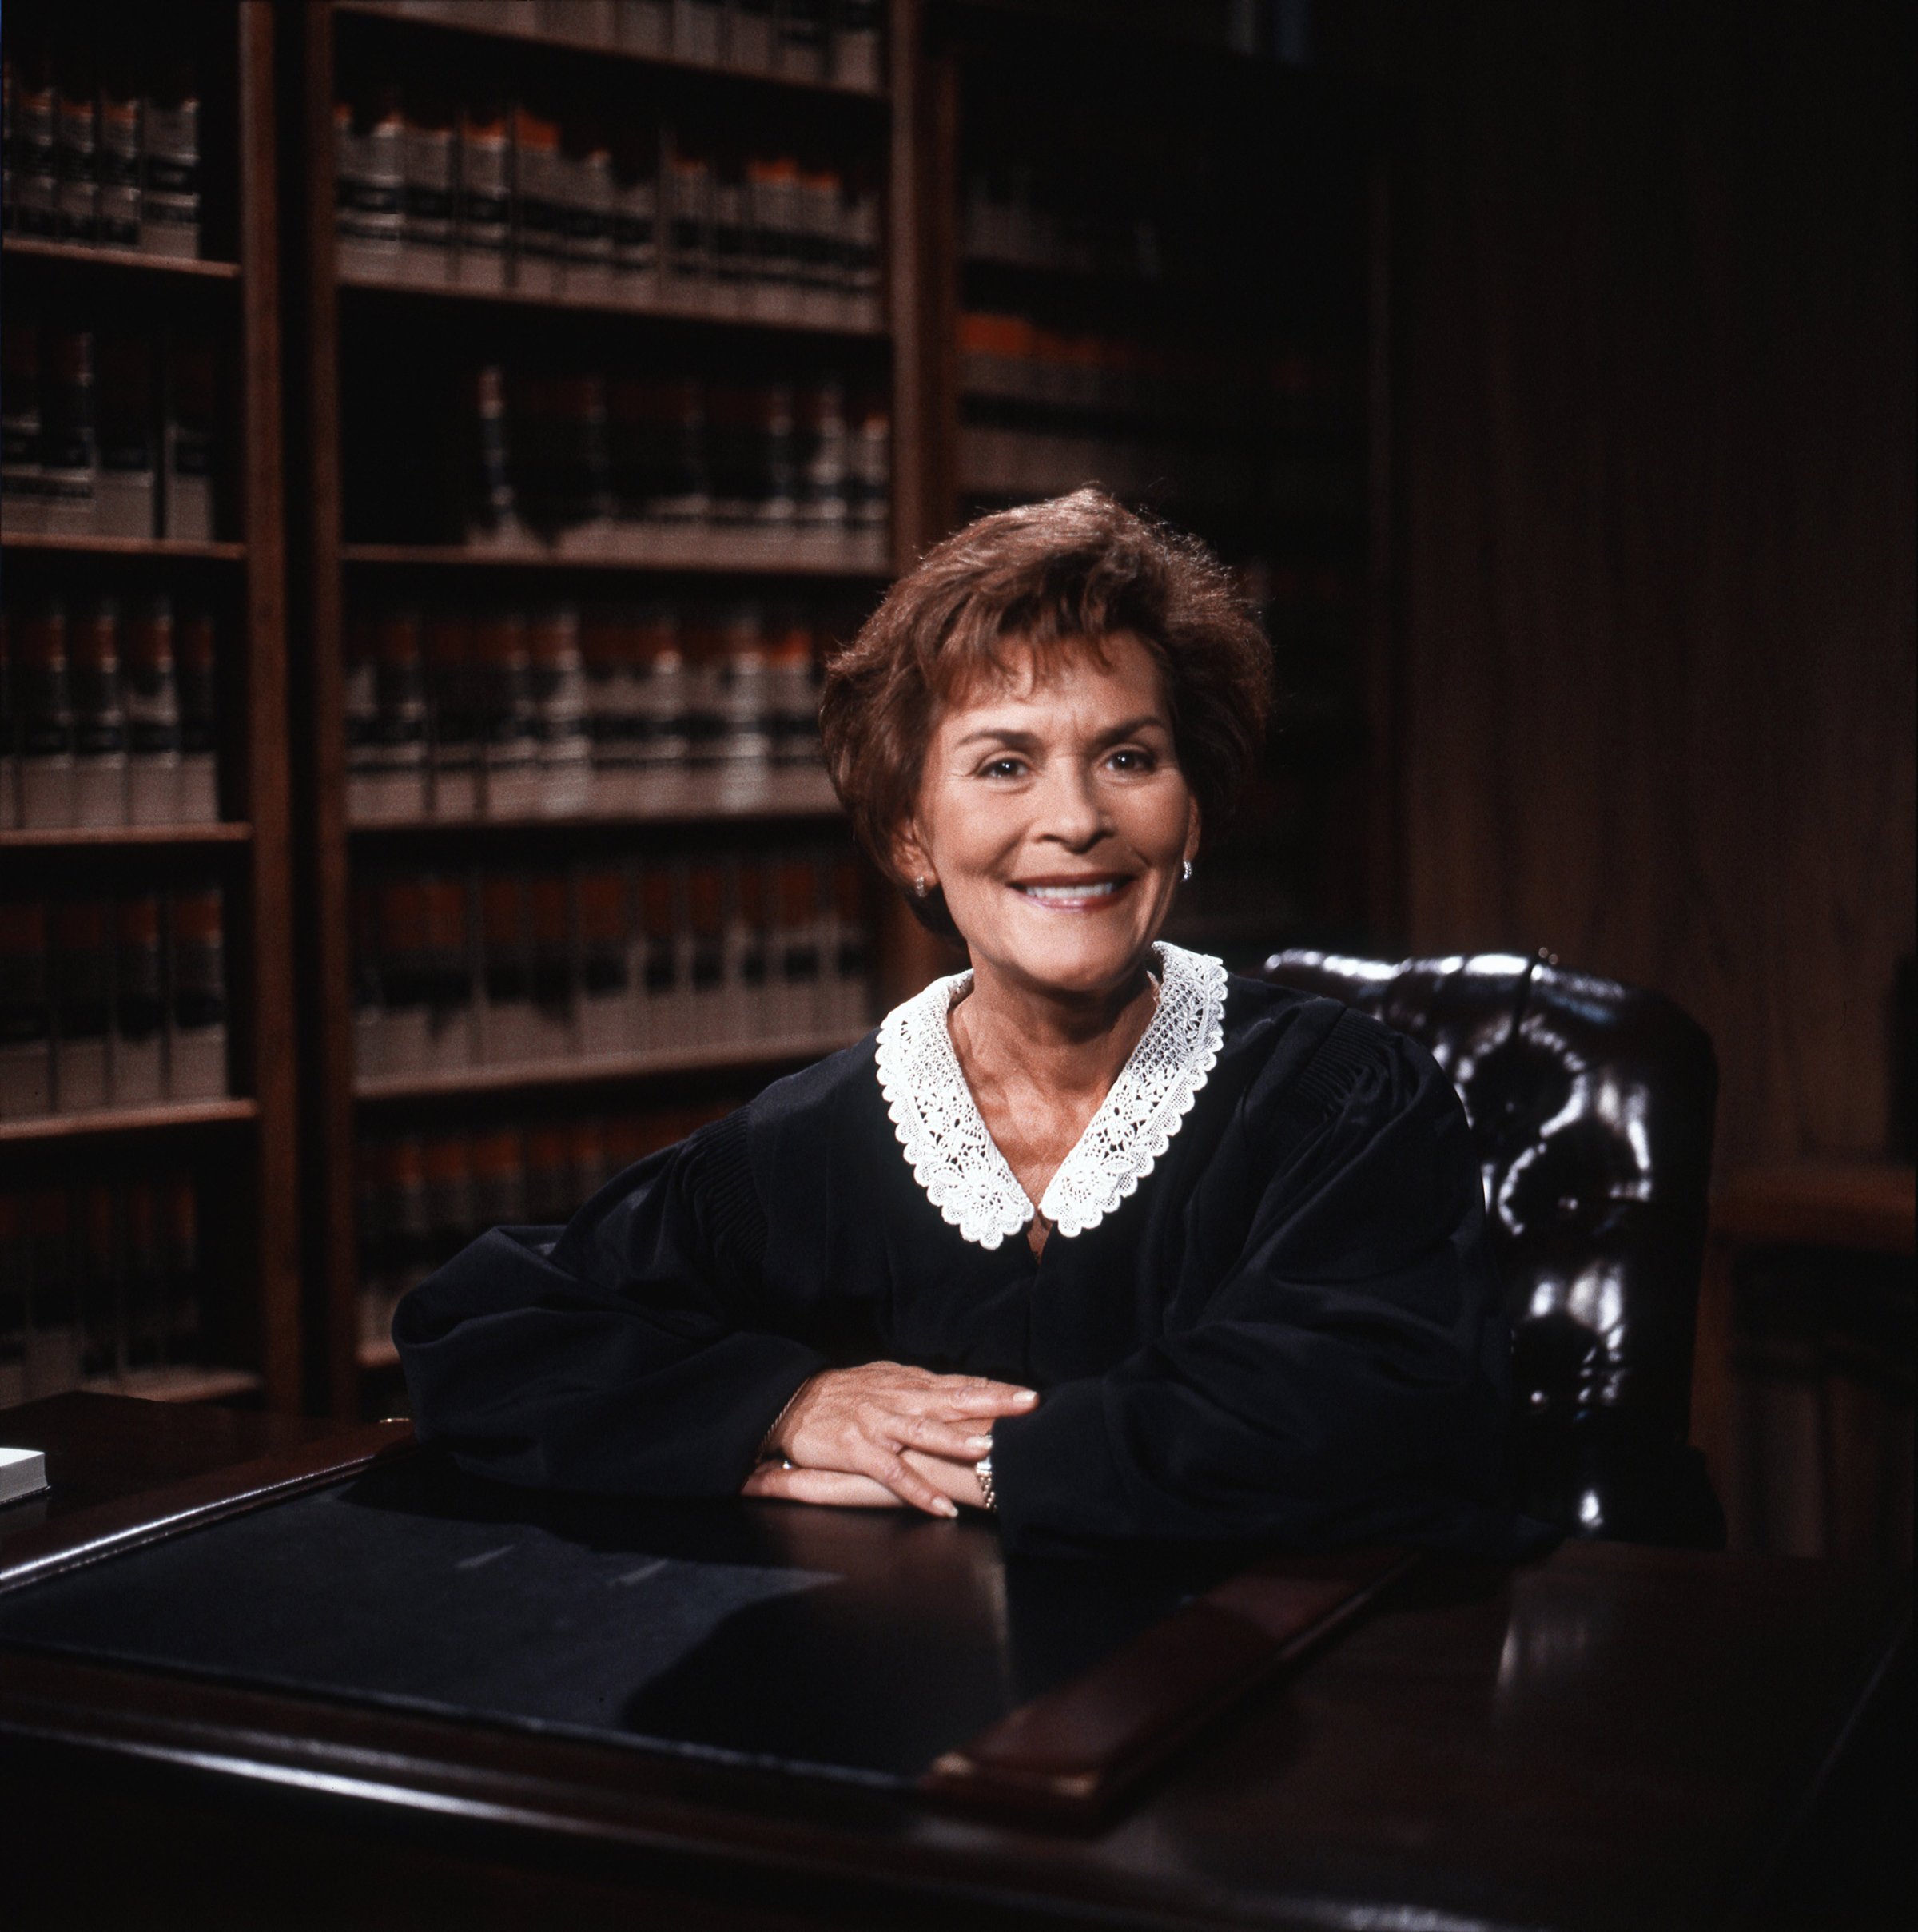 LOS ANGELES - FEBRUARY 14: Judge Judy, Judith Sheindlin poses for a portrait on February 14. 1997 in Los Angeles, California. (Photo by Donaldson Collection/Michael Ochs Archives/Getty Images)